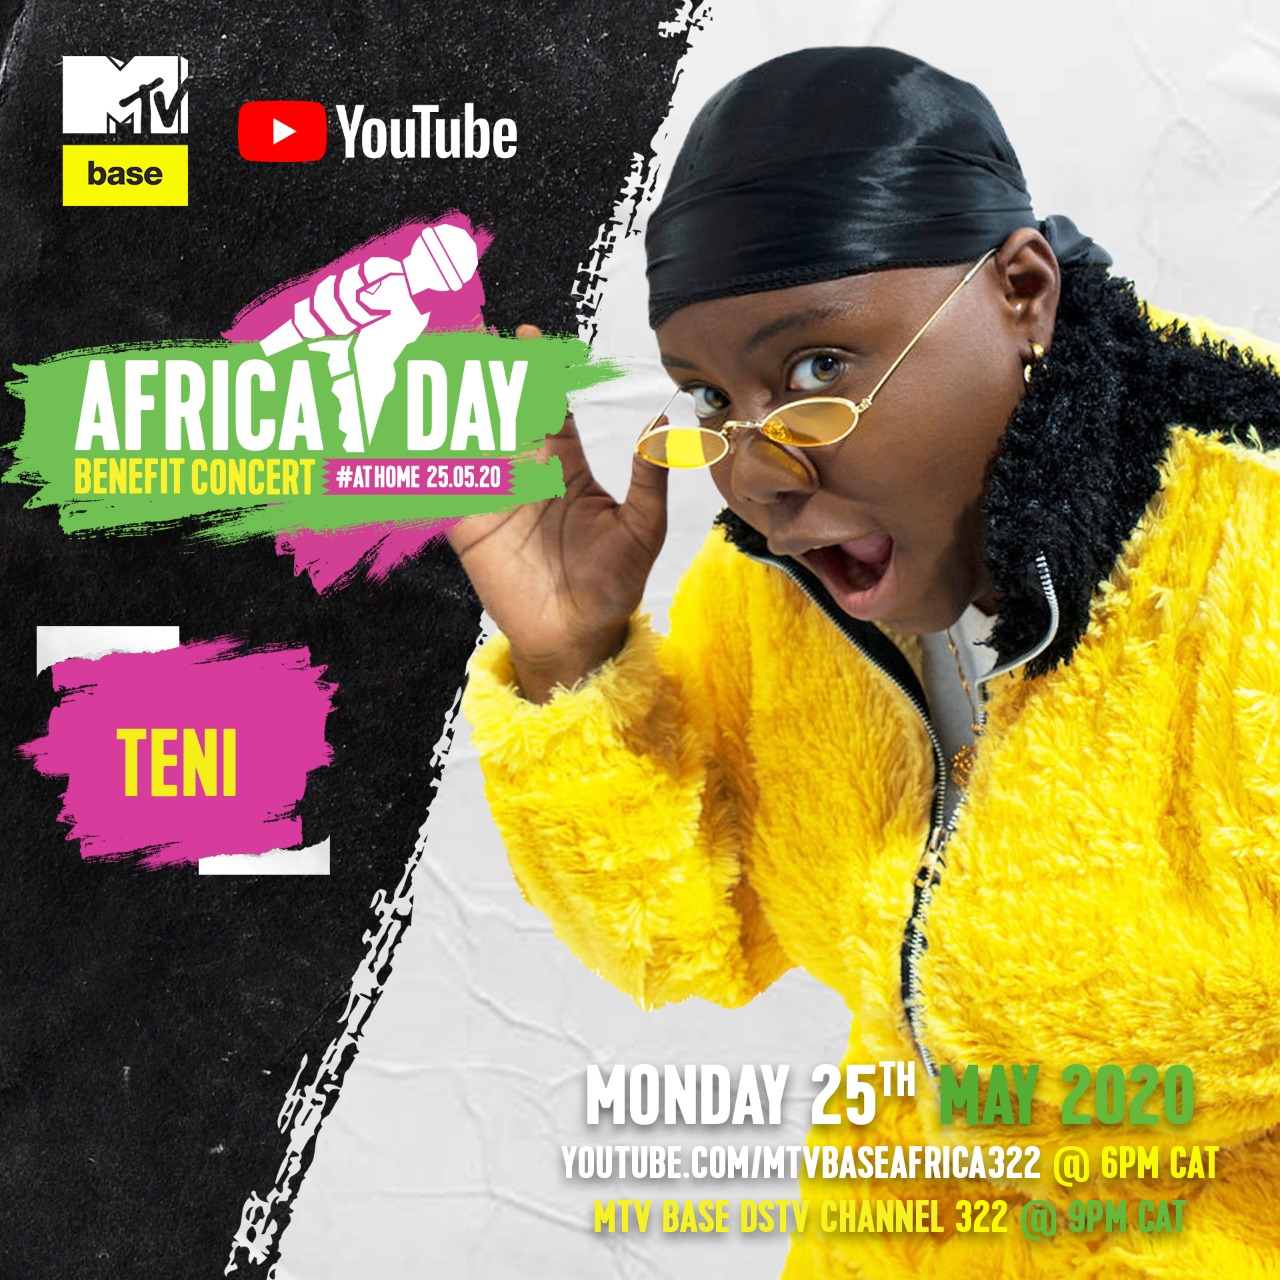 Bebe Cool, Sean Paul, Nasty C, Teni, Sho Madjozi and more to perform in the “Africa Day" Benefit Concert At Home. 23 MUGIBSON